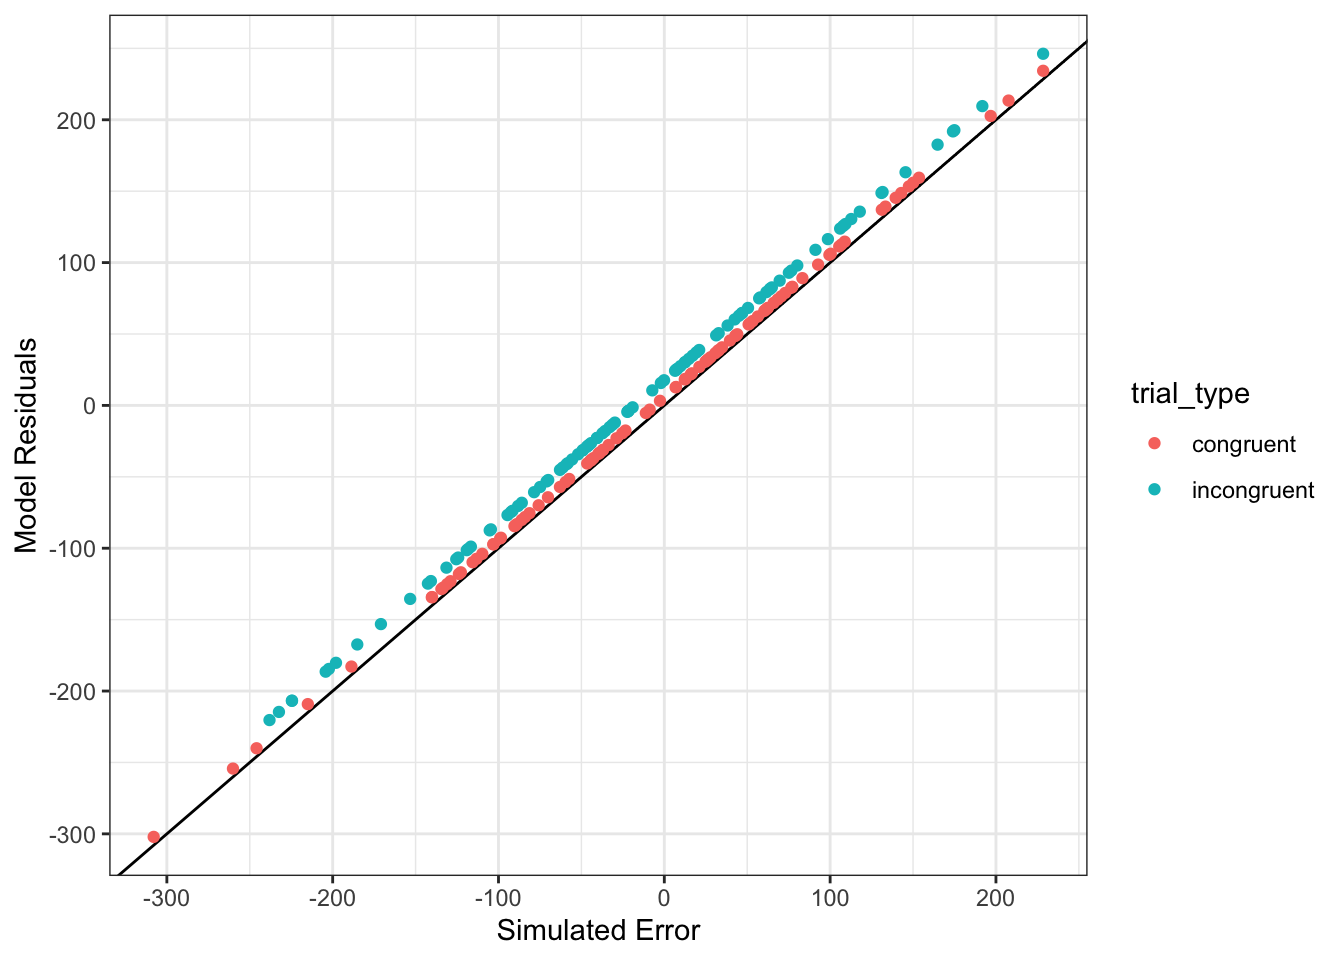 Model residuals should be very similar to the simulated error